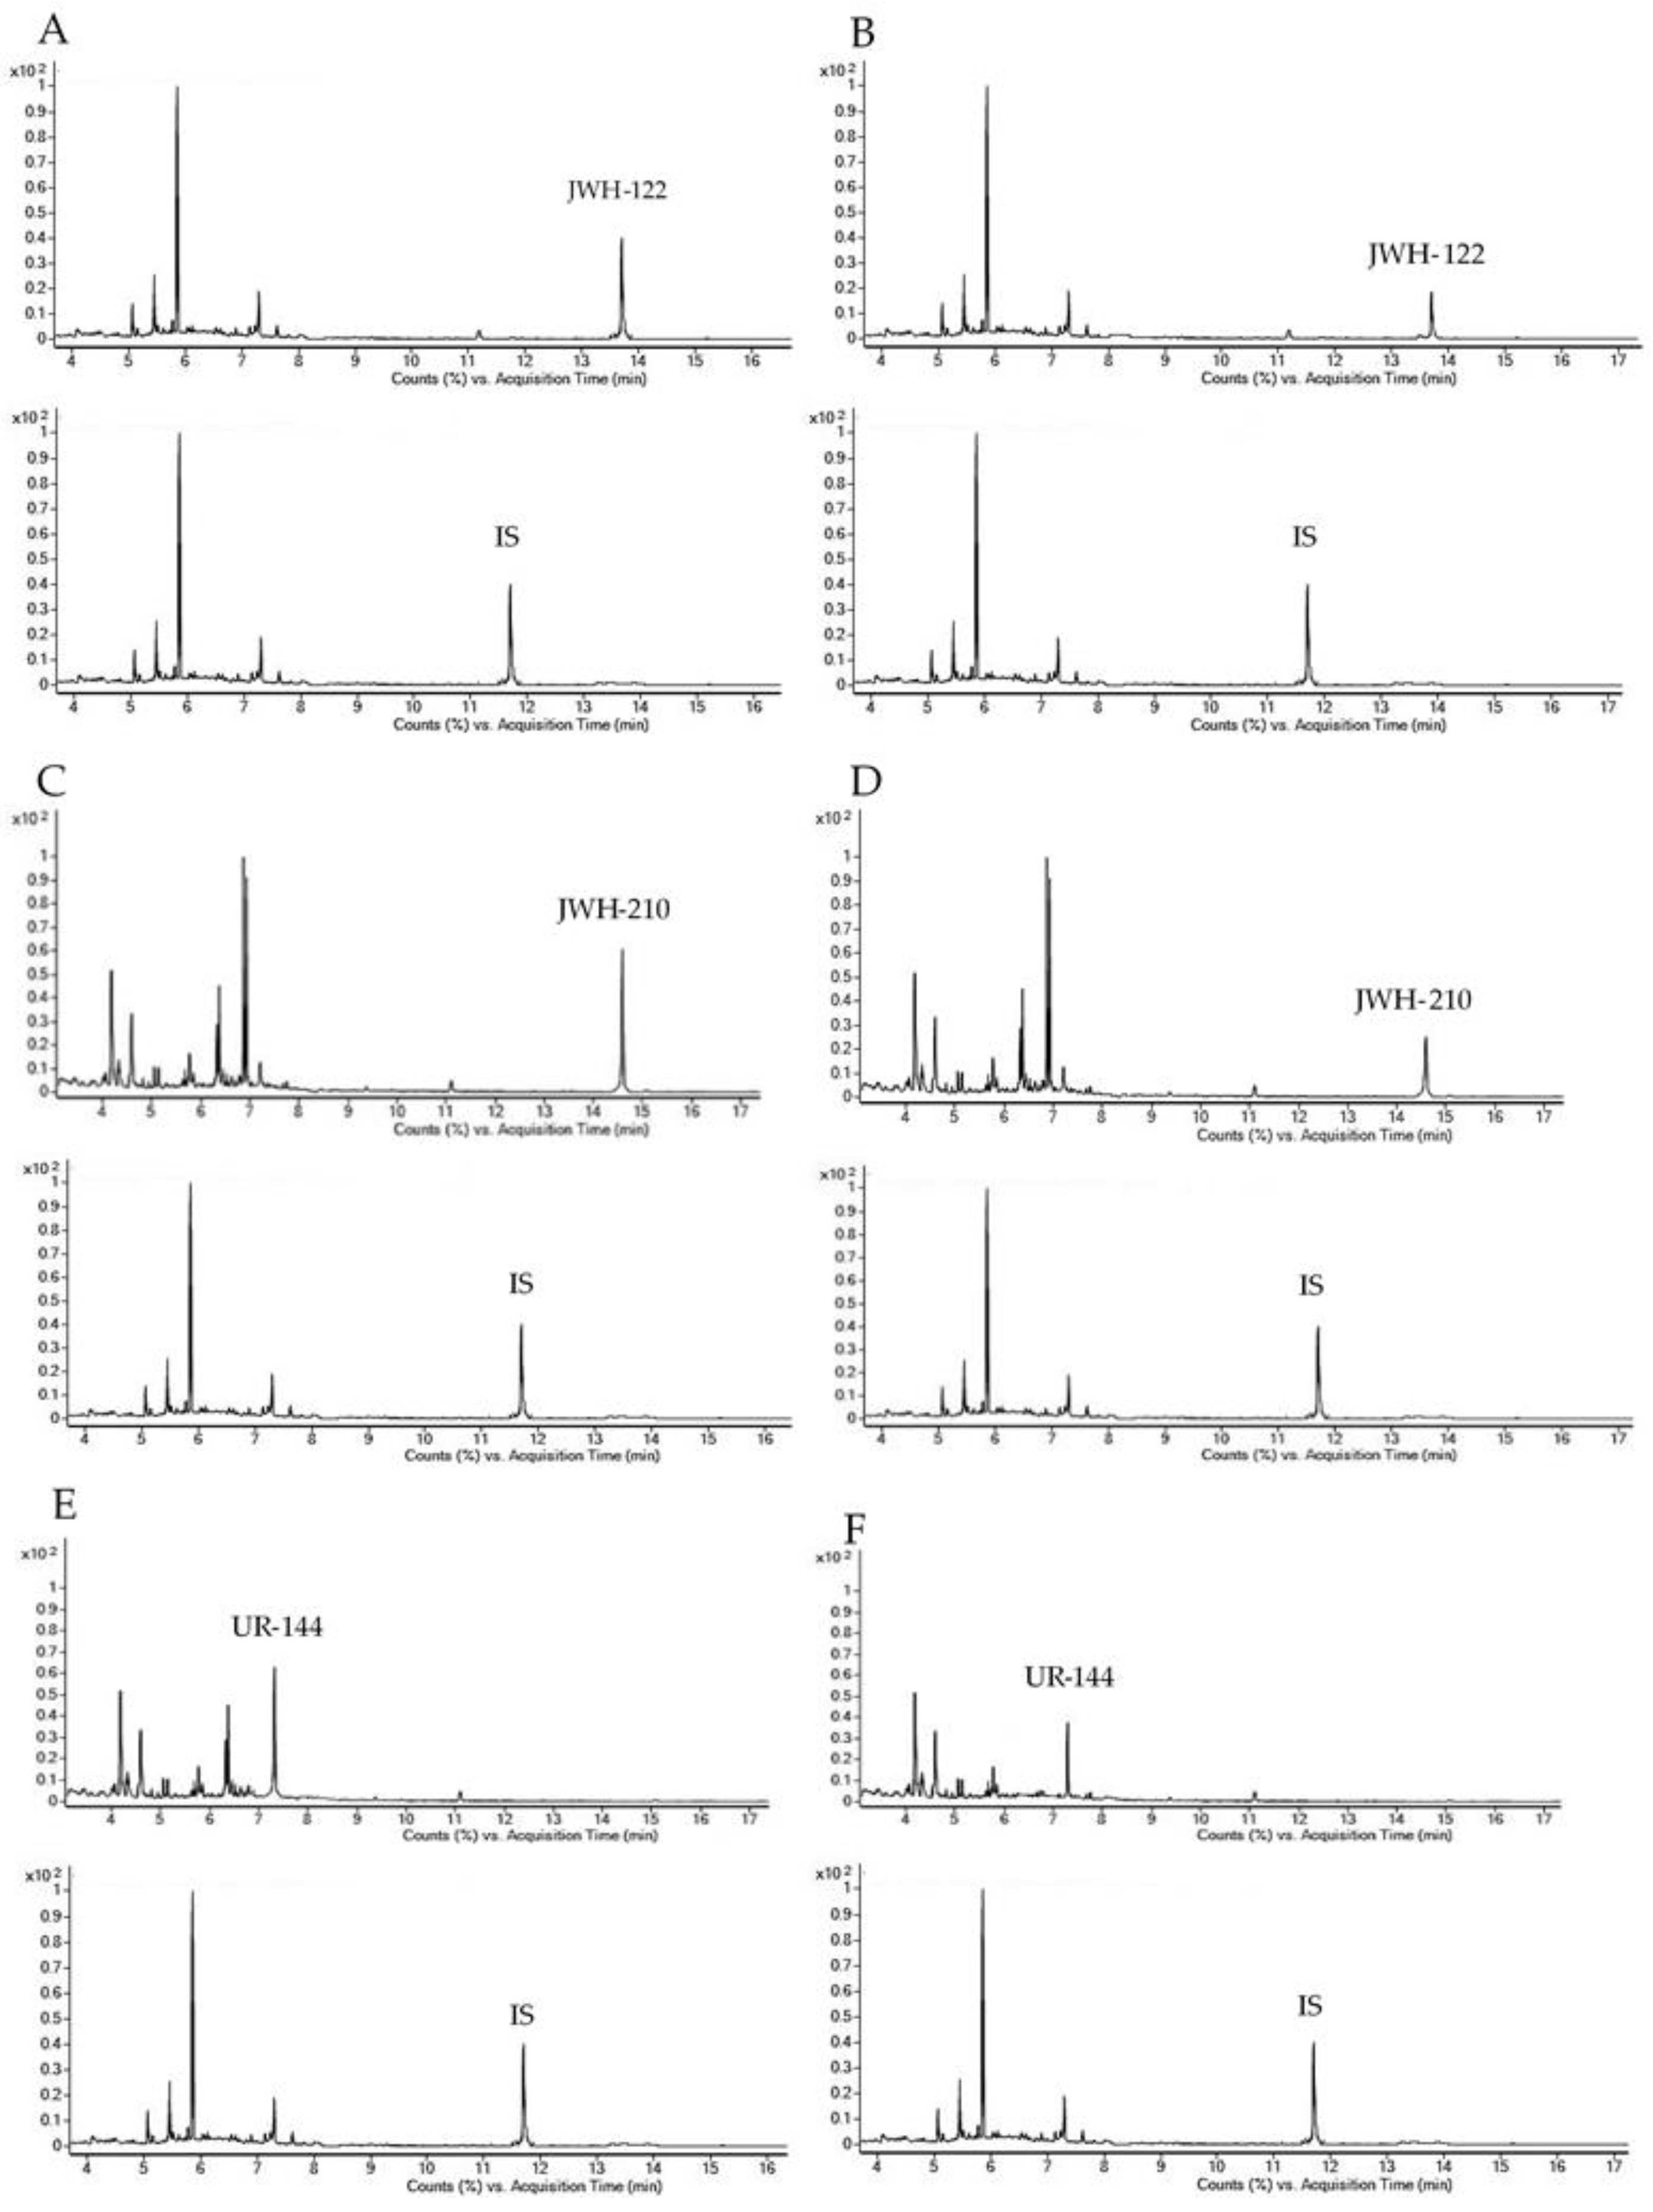 IJMS | Free Full-Text | Determination of the Synthetic Cannabinoids  JWH-122, JWH-210, UR-144 in Oral Fluid of Consumers by GC-MS and  Quantification of Parent Compounds and Metabolites by UHPLC-MS/MS